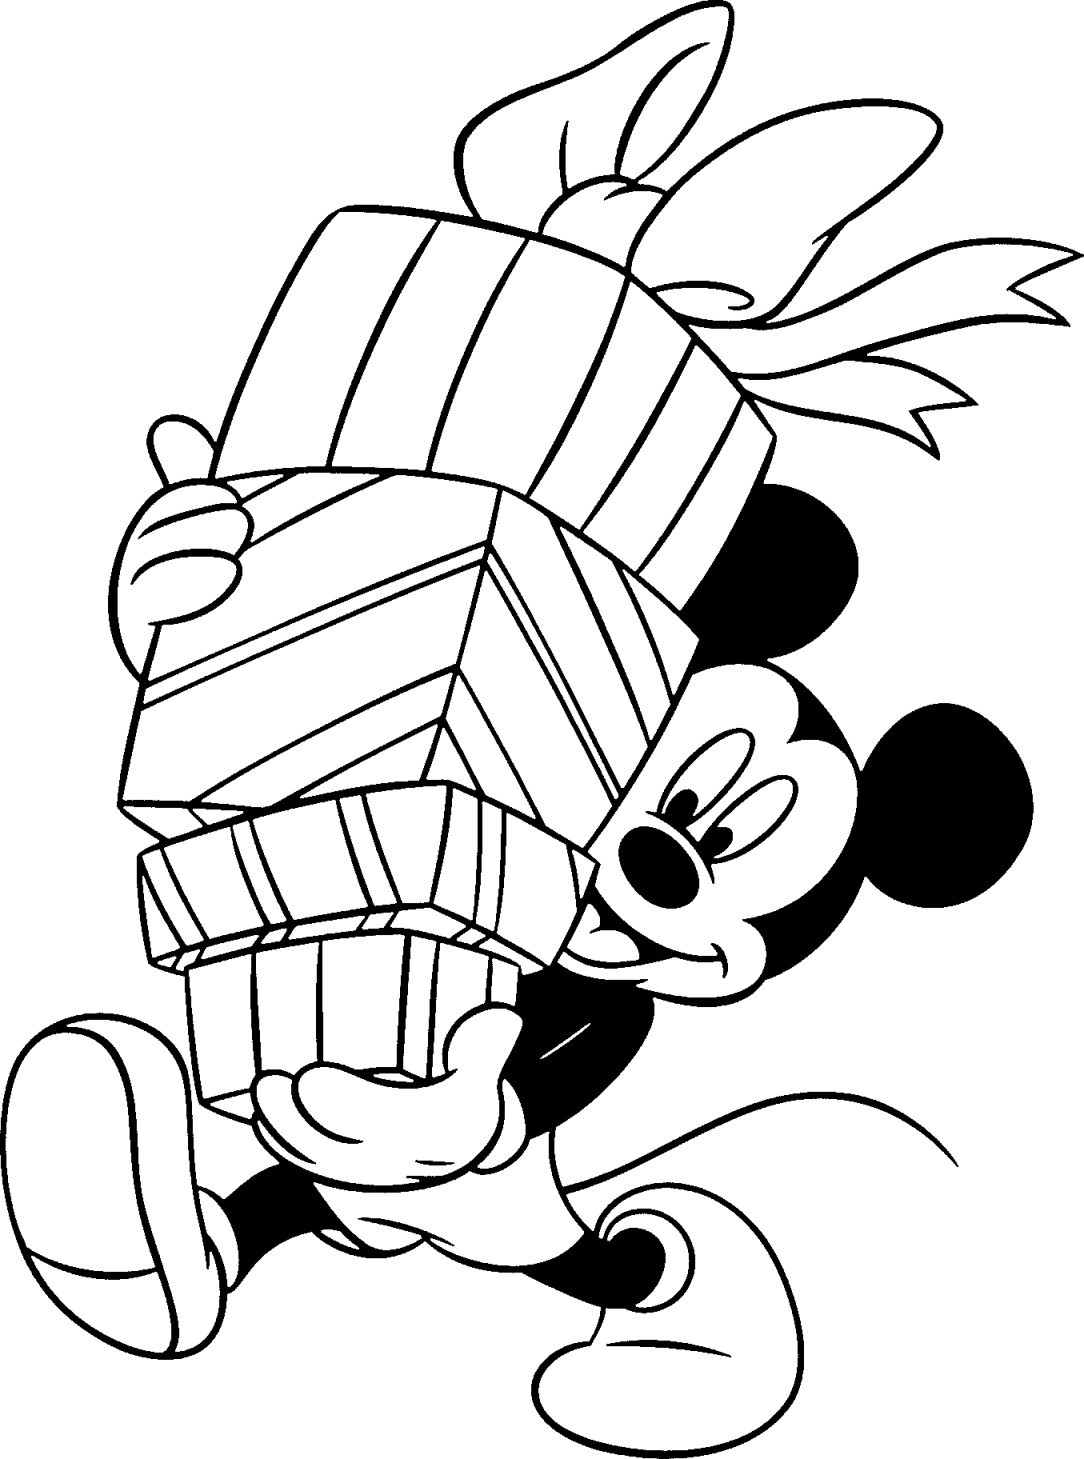 Free Disney Coloring Pages For Kids
 Free Disney Christmas Printable Coloring Pages for Kids